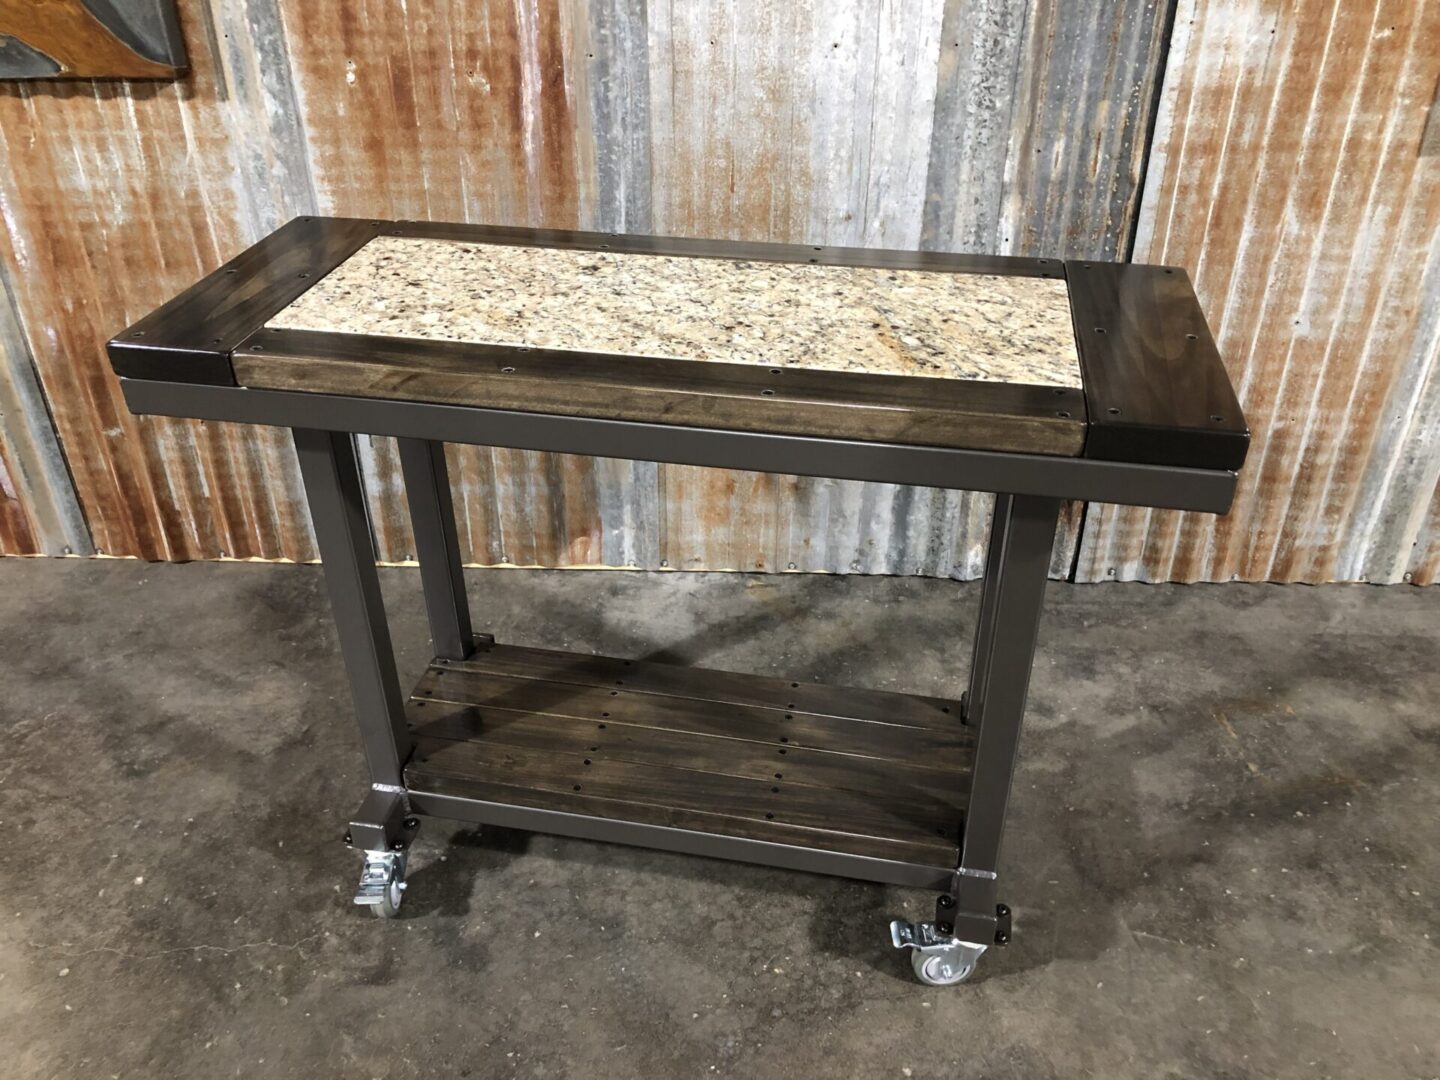 This beautiful worktable was designed for Ellsworth Project